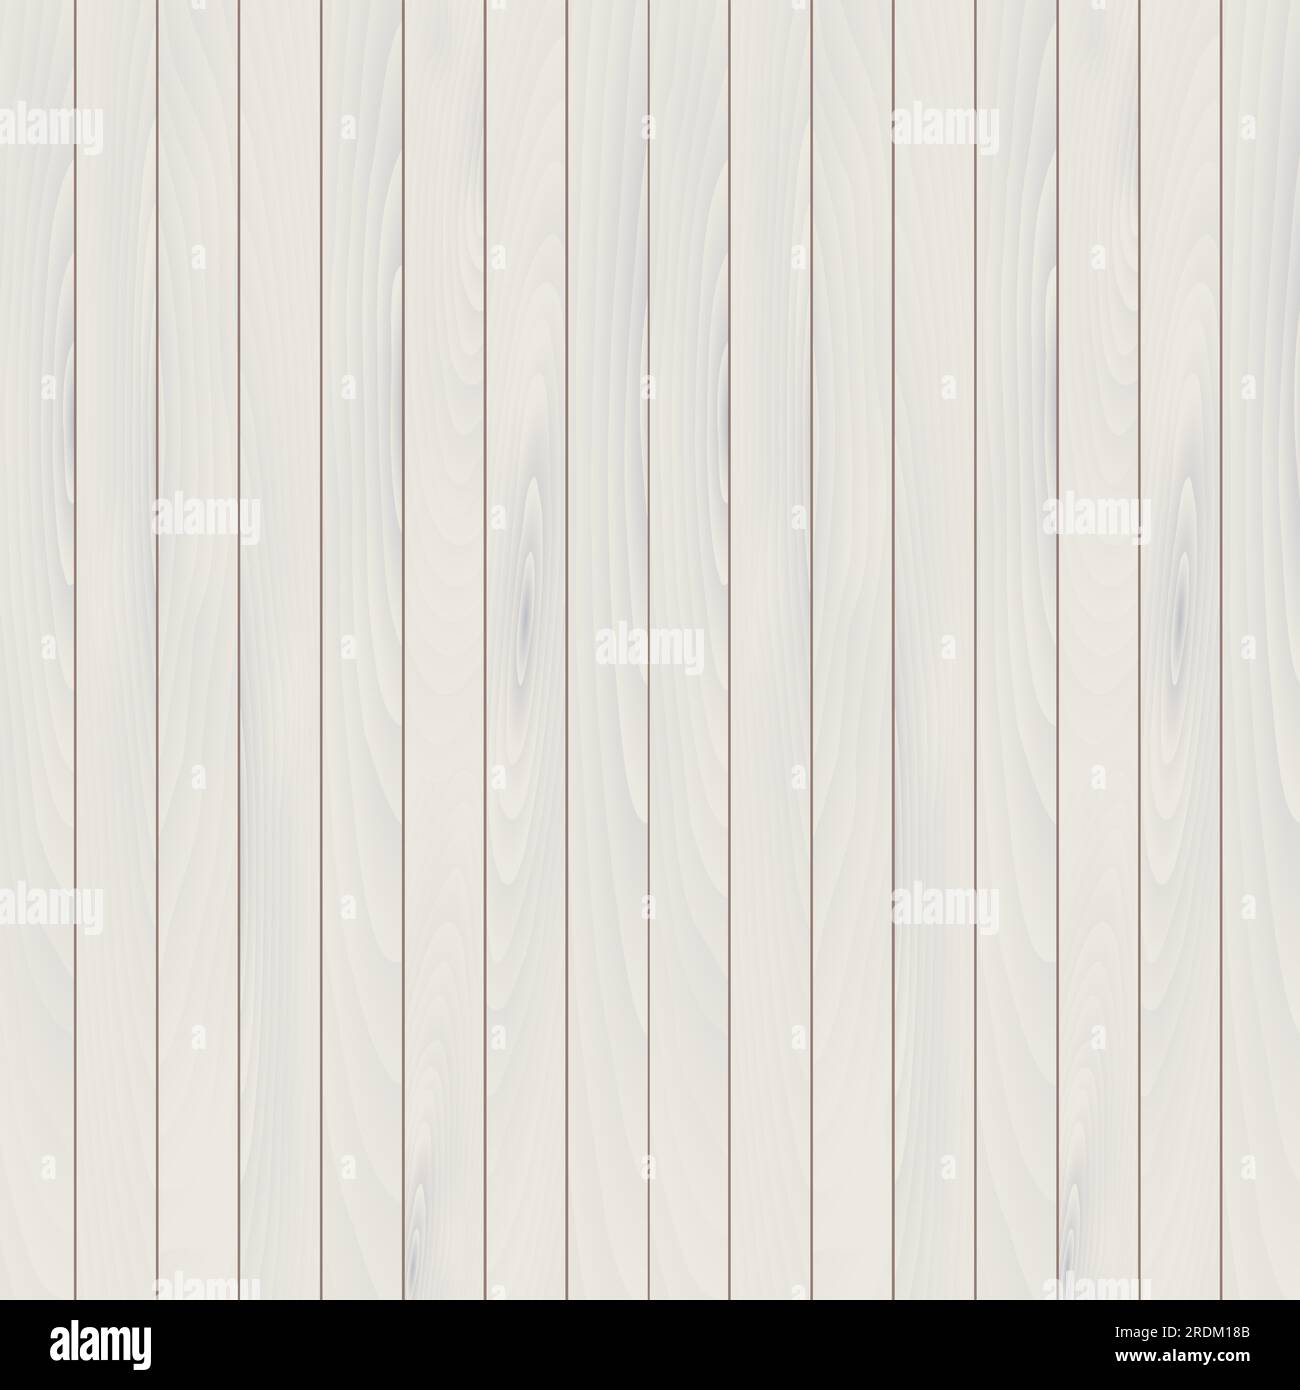 Vector Seamless Wood Plank Texture Background Stock Vector by